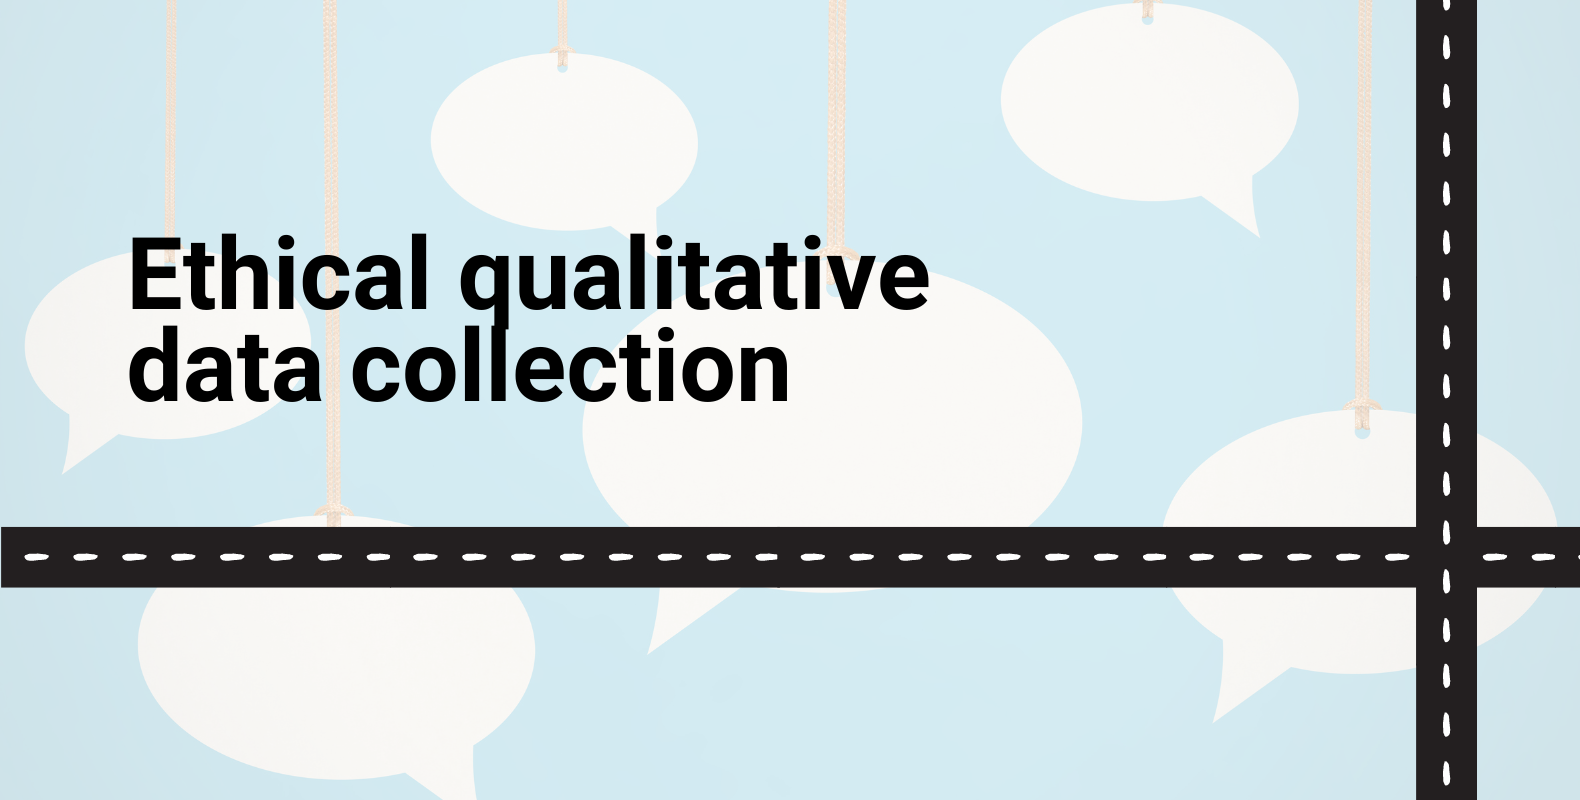 Ethical qualitative data collection